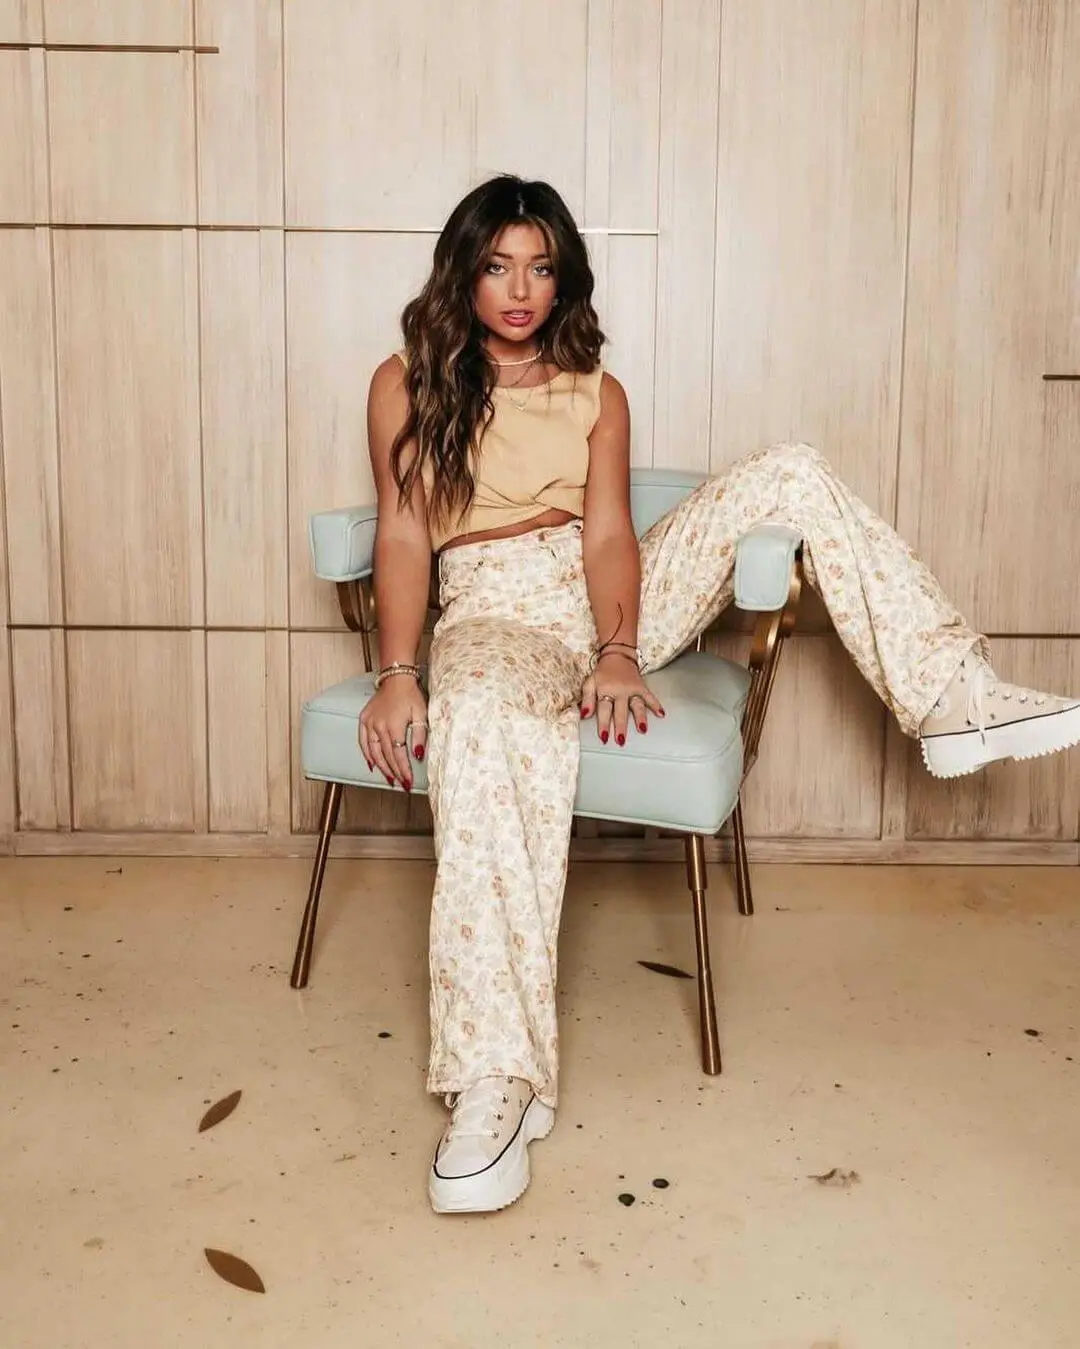 Tabitha Swatish wearing a cream crop top, light cream high-waist pants, and white sneakers while sitting like a boss on a gray chair